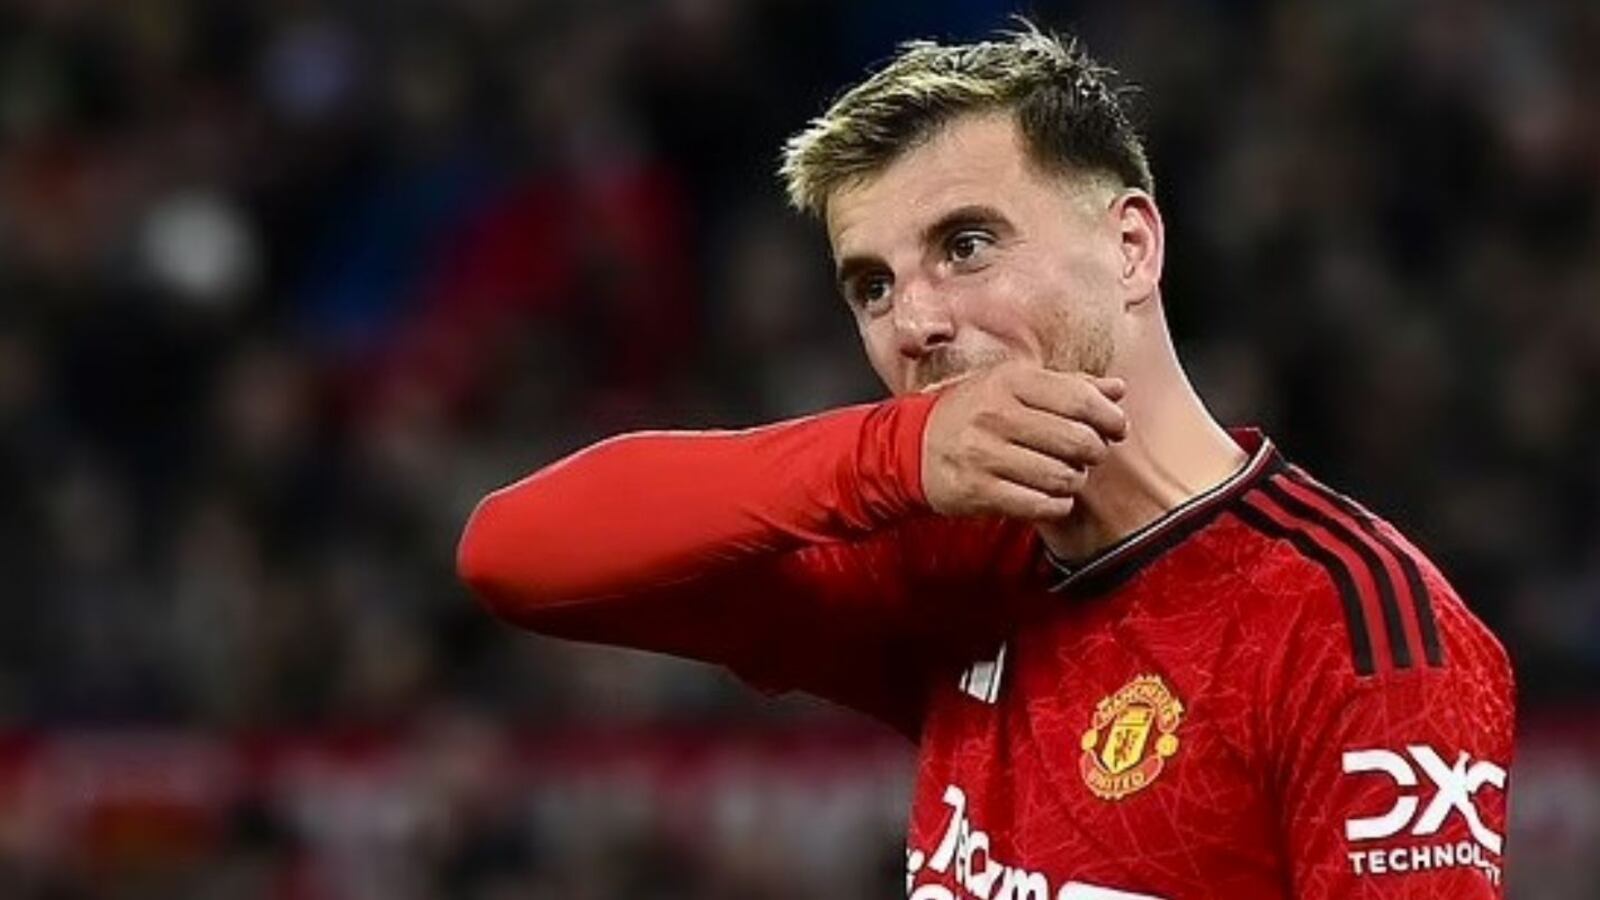 The harsh words of this former Chelsea star regarding Mason Mount and his move to United